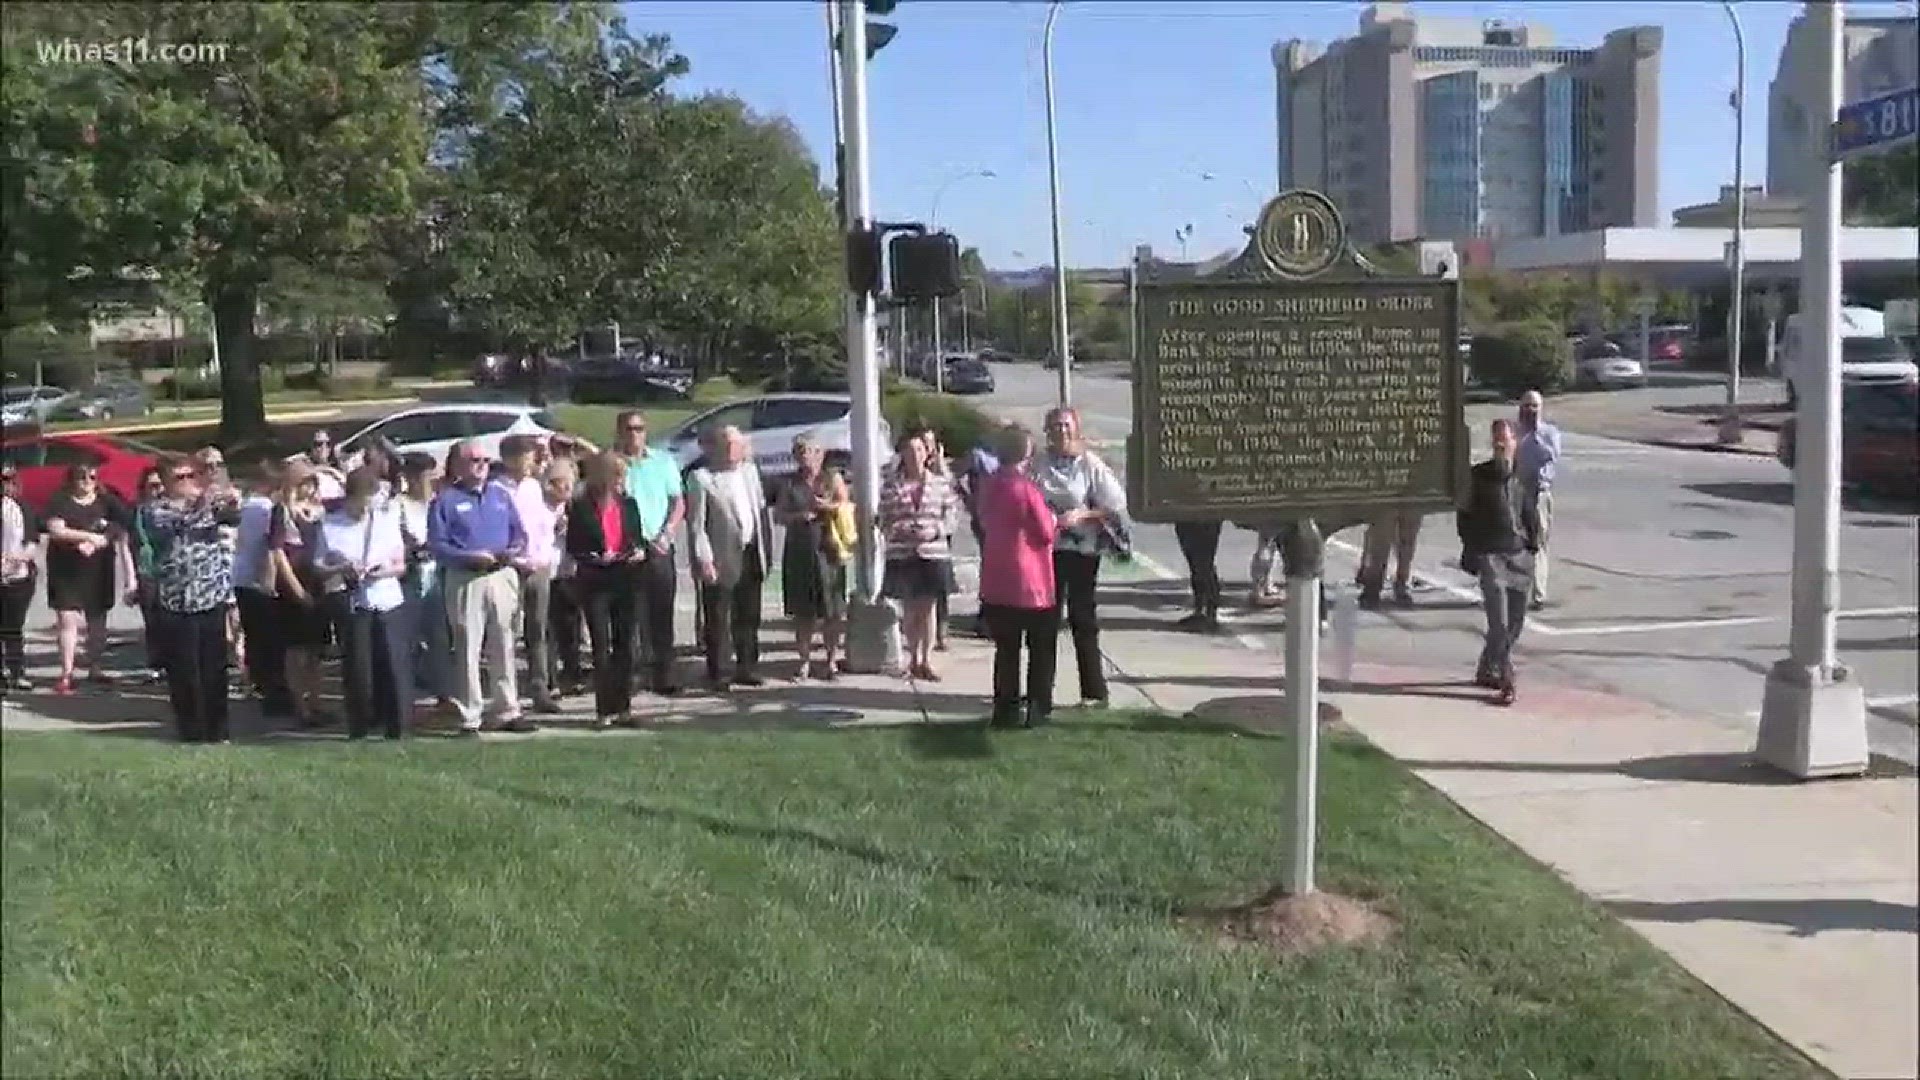 Maryhurst celebrated its 175th year of helping victims of abuse and neglect by unveiling a historic marker to honor their nearly two centuries of service.